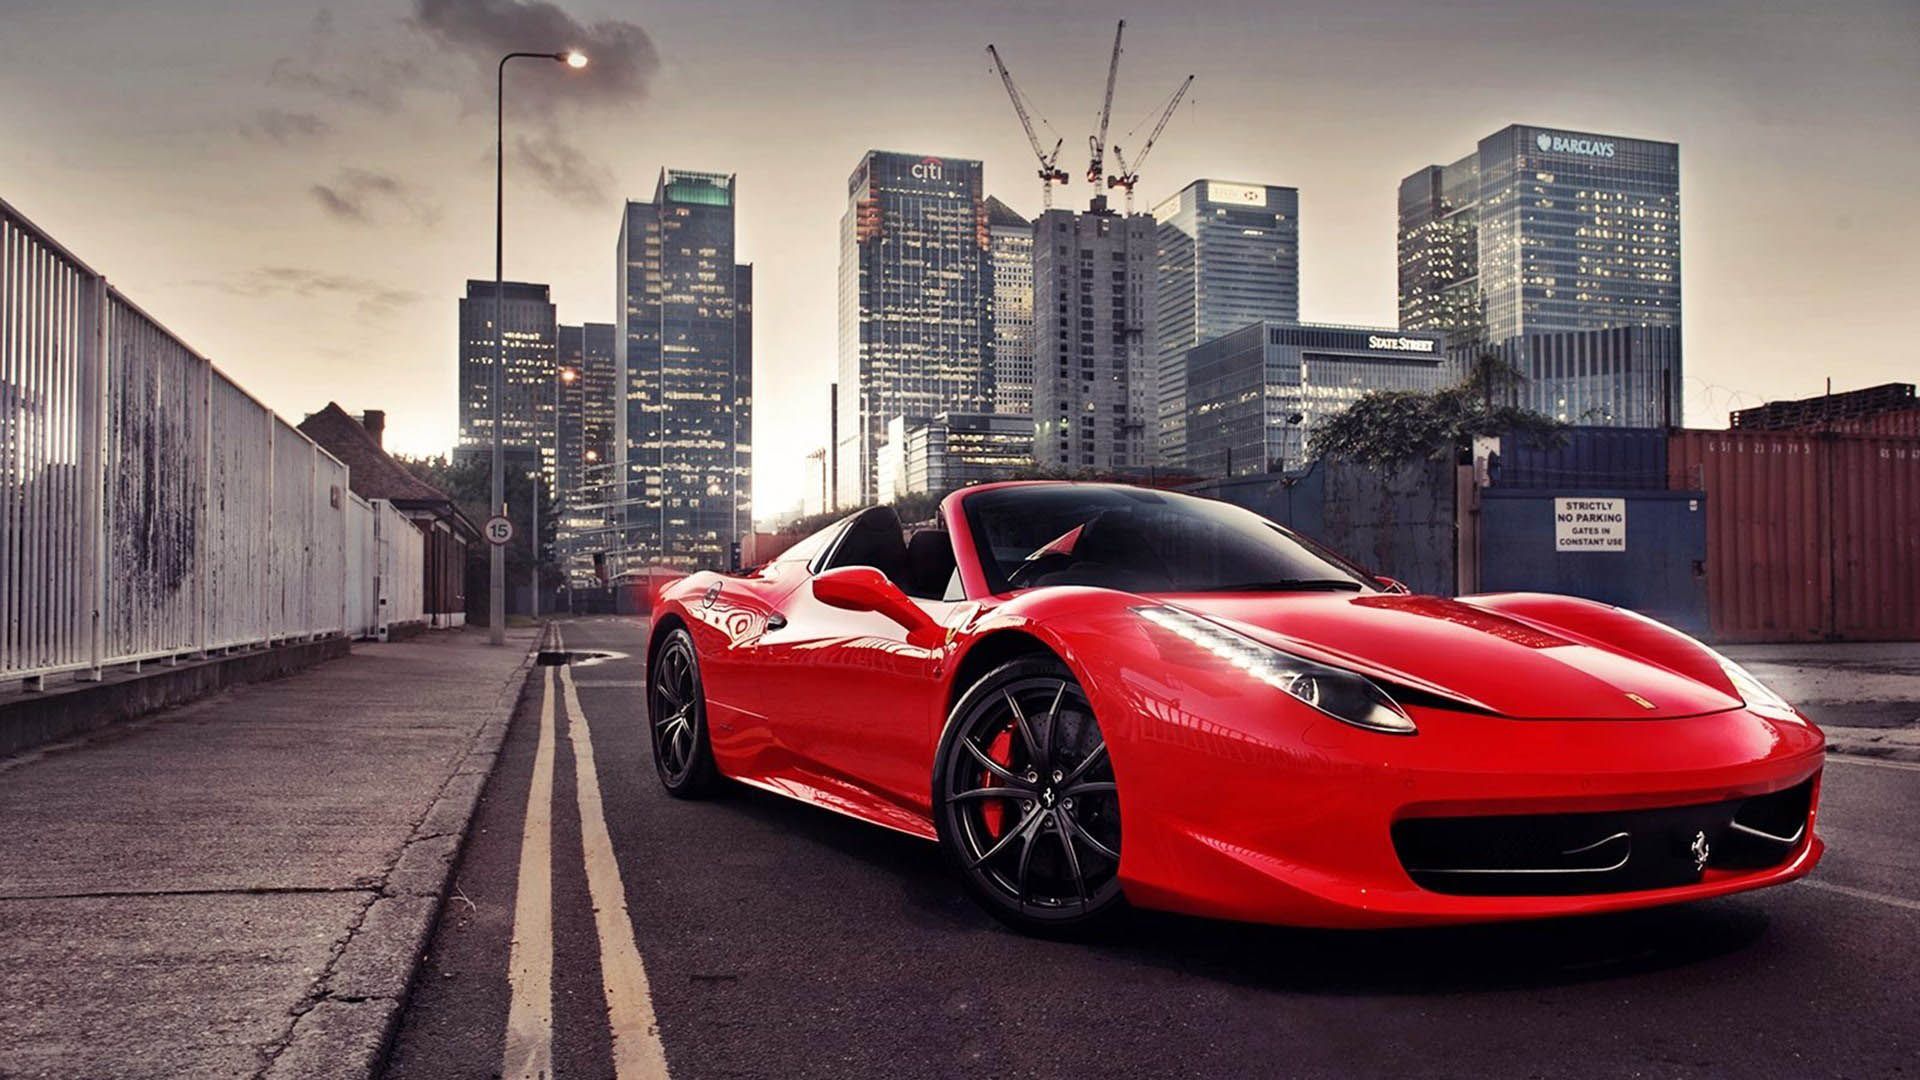 Ferrari Spider In The City Wallpaper Products Car